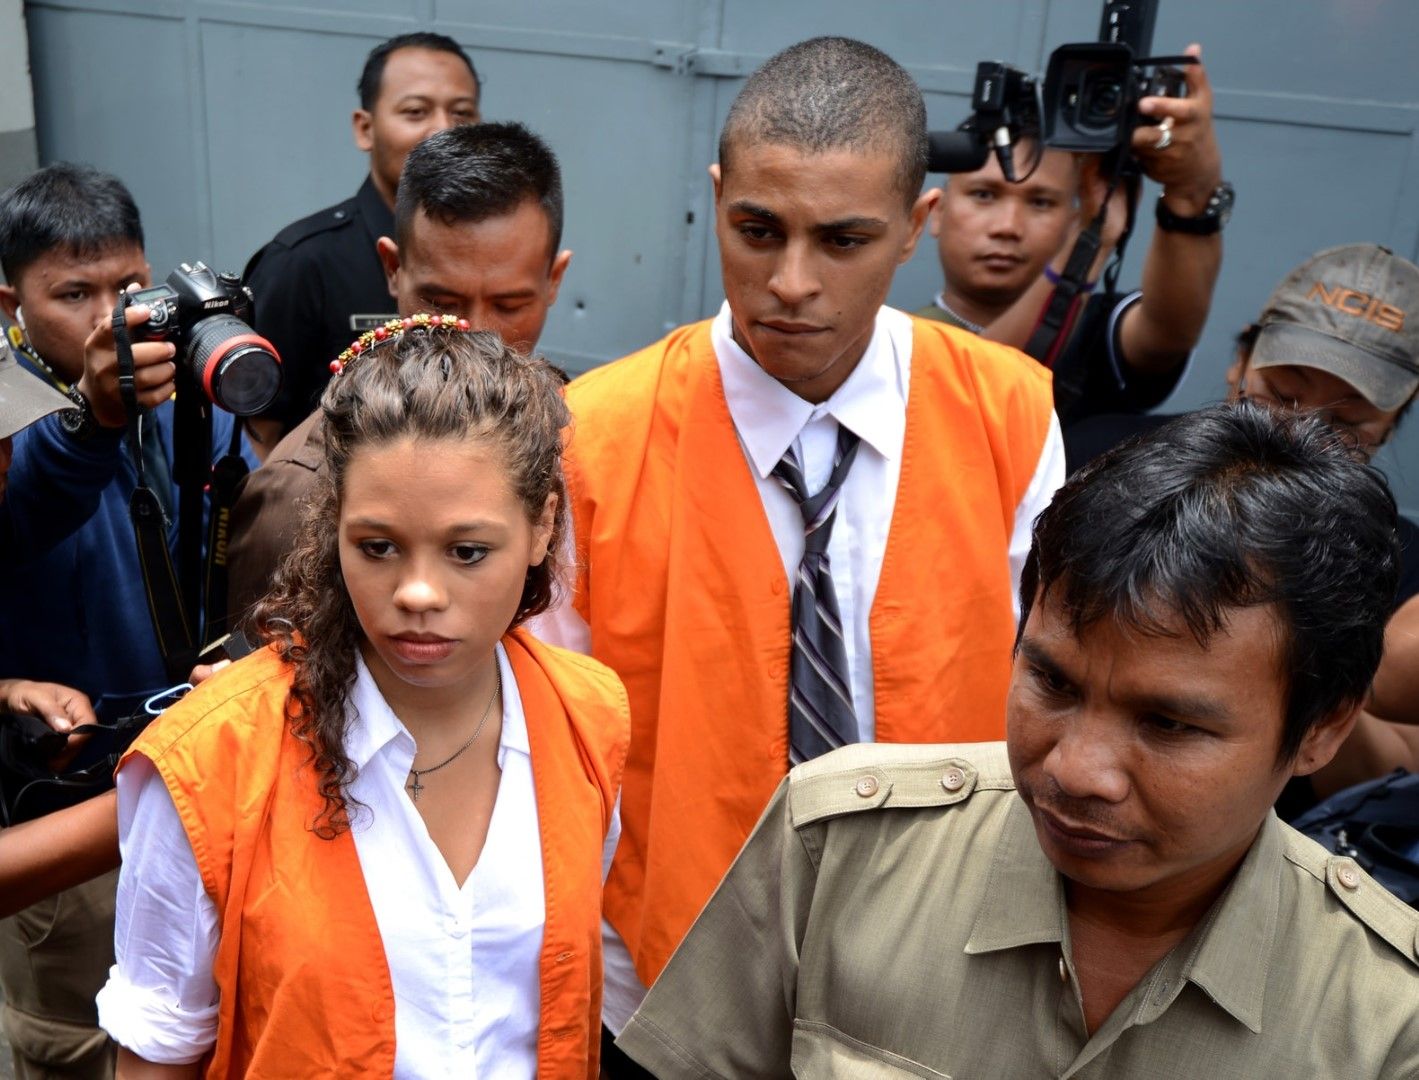 Chicago woman in Bali 'suitcase murder' to be released Oct. 29